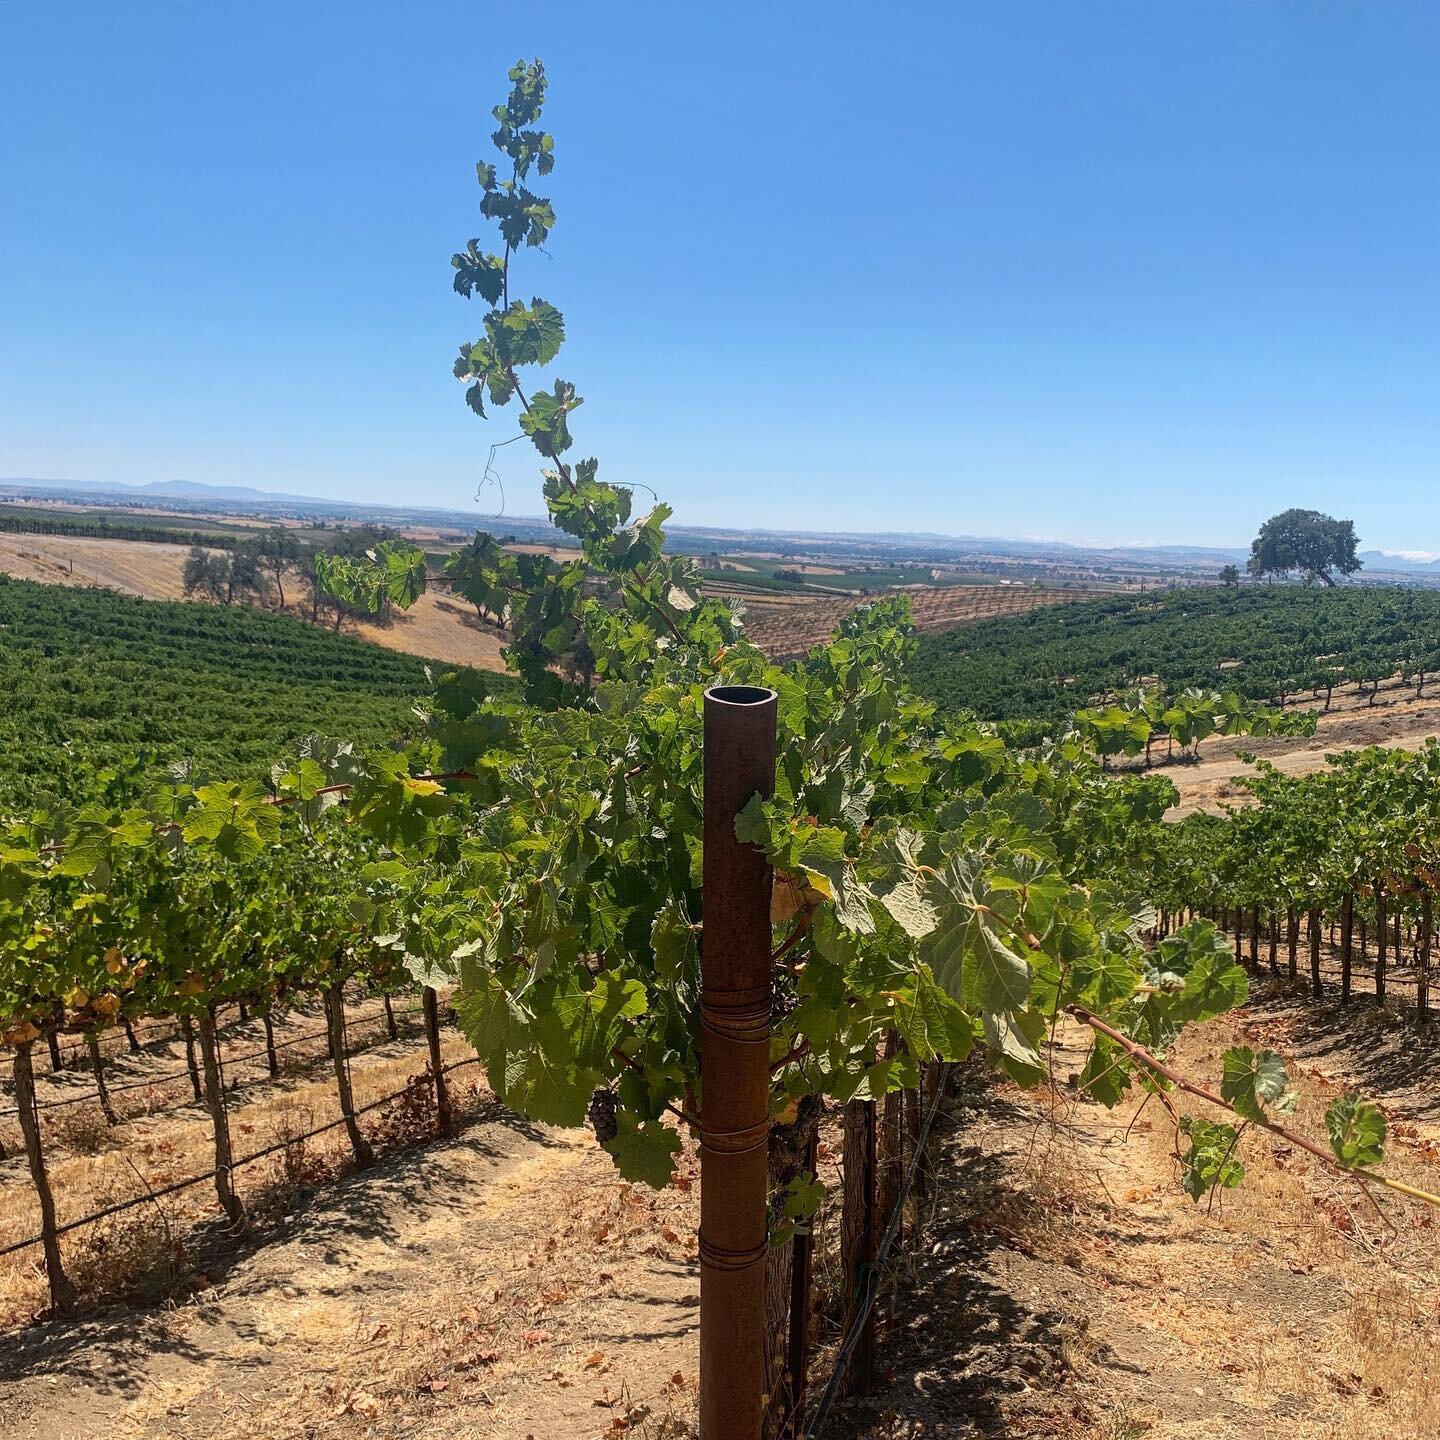 The newest addition to the Filomena vineyard family; Ranchita Canyon Cabernet Pfeffer from San Miguel. Really excited about this wine! #cabpfeffer #estrelladistrict #sanmiguel